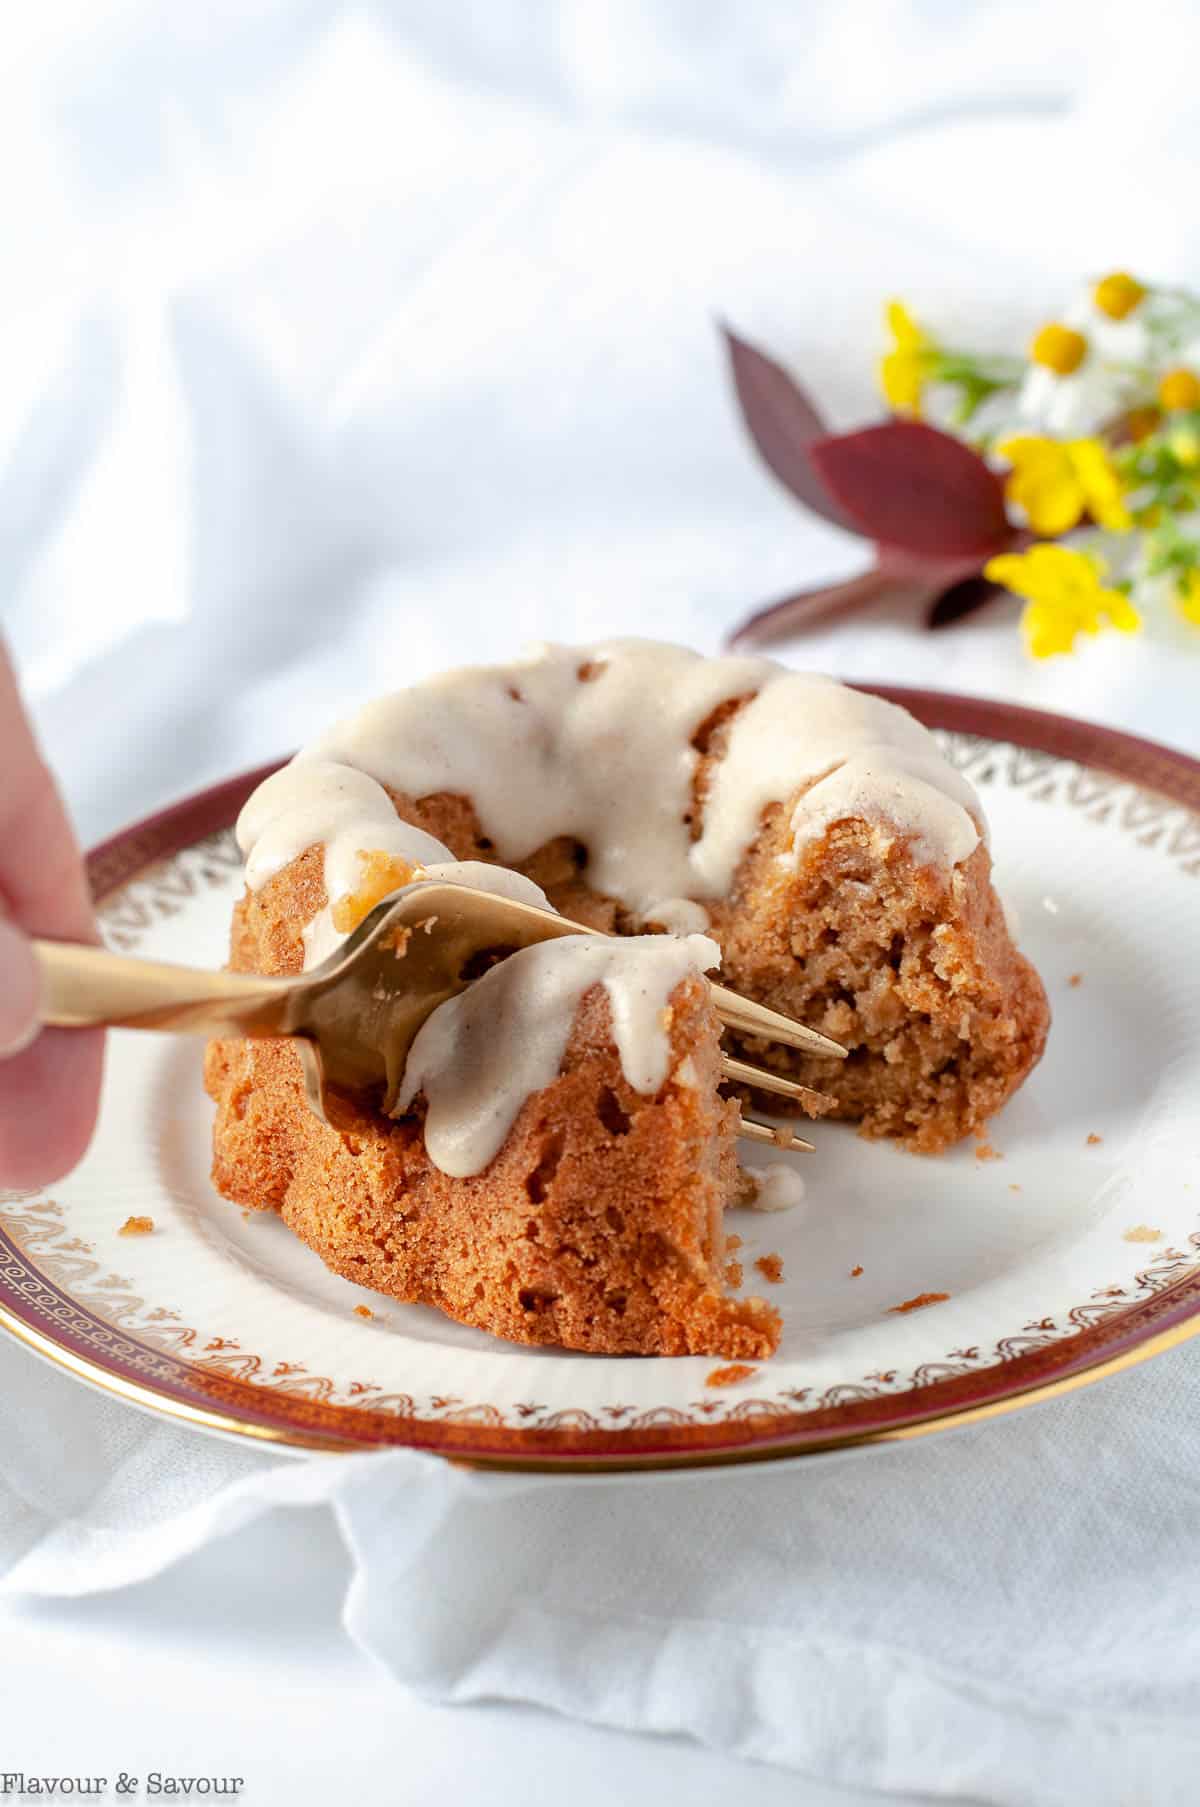 https://www.flavourandsavour.com/wp-content/uploads/2020/10/Cutting-into-a-Mni-Apple-Bundt-Cake-with-a-fork.jpg